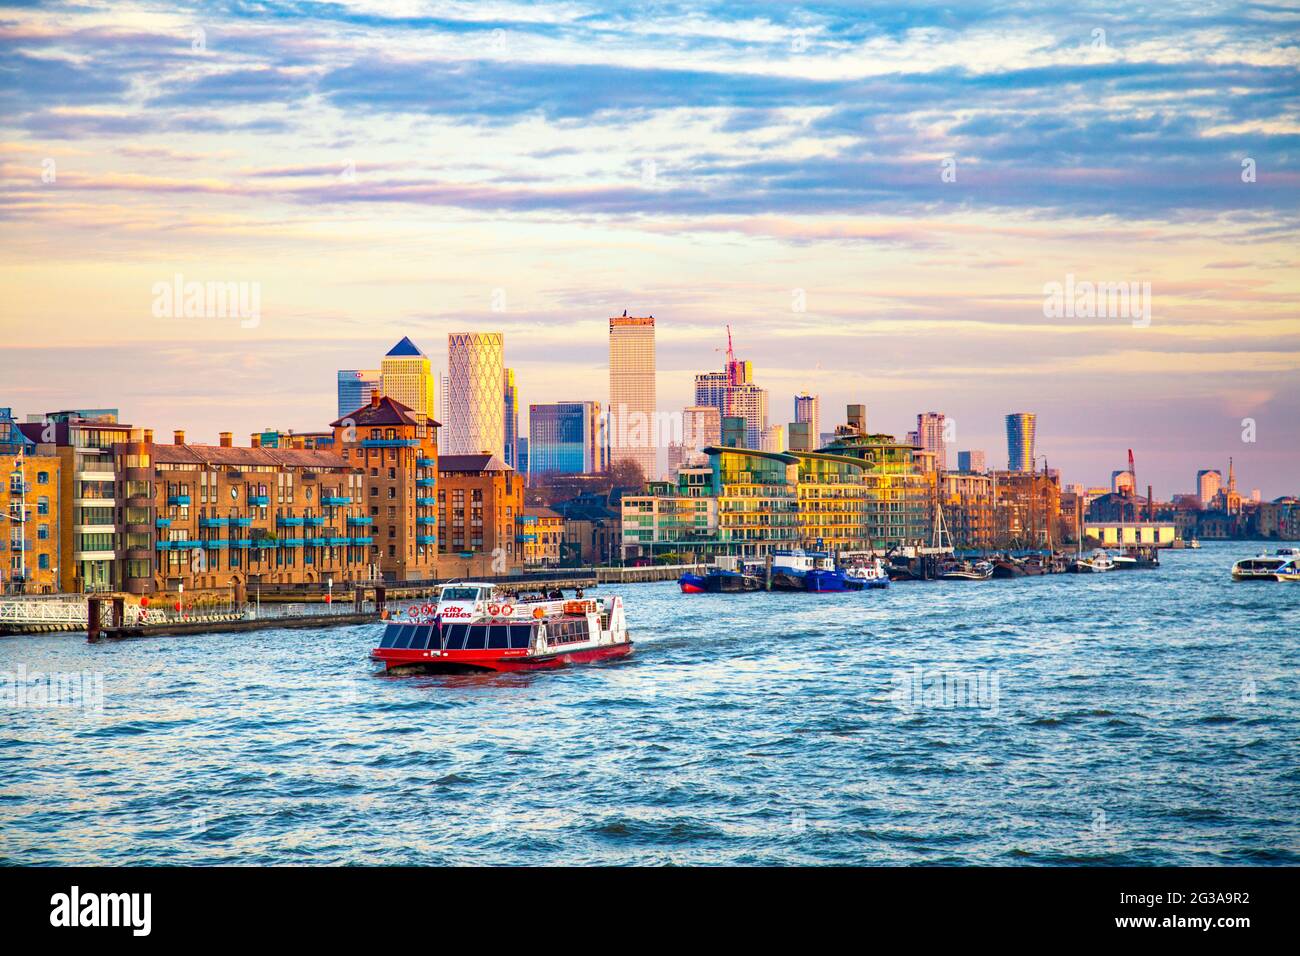 View of East London from Tower Bridge, warehouses of Wapping and Canary Wharf Skyscrapers at sunset, City Cruises tour boat on the Thames river, Londo Stock Photo